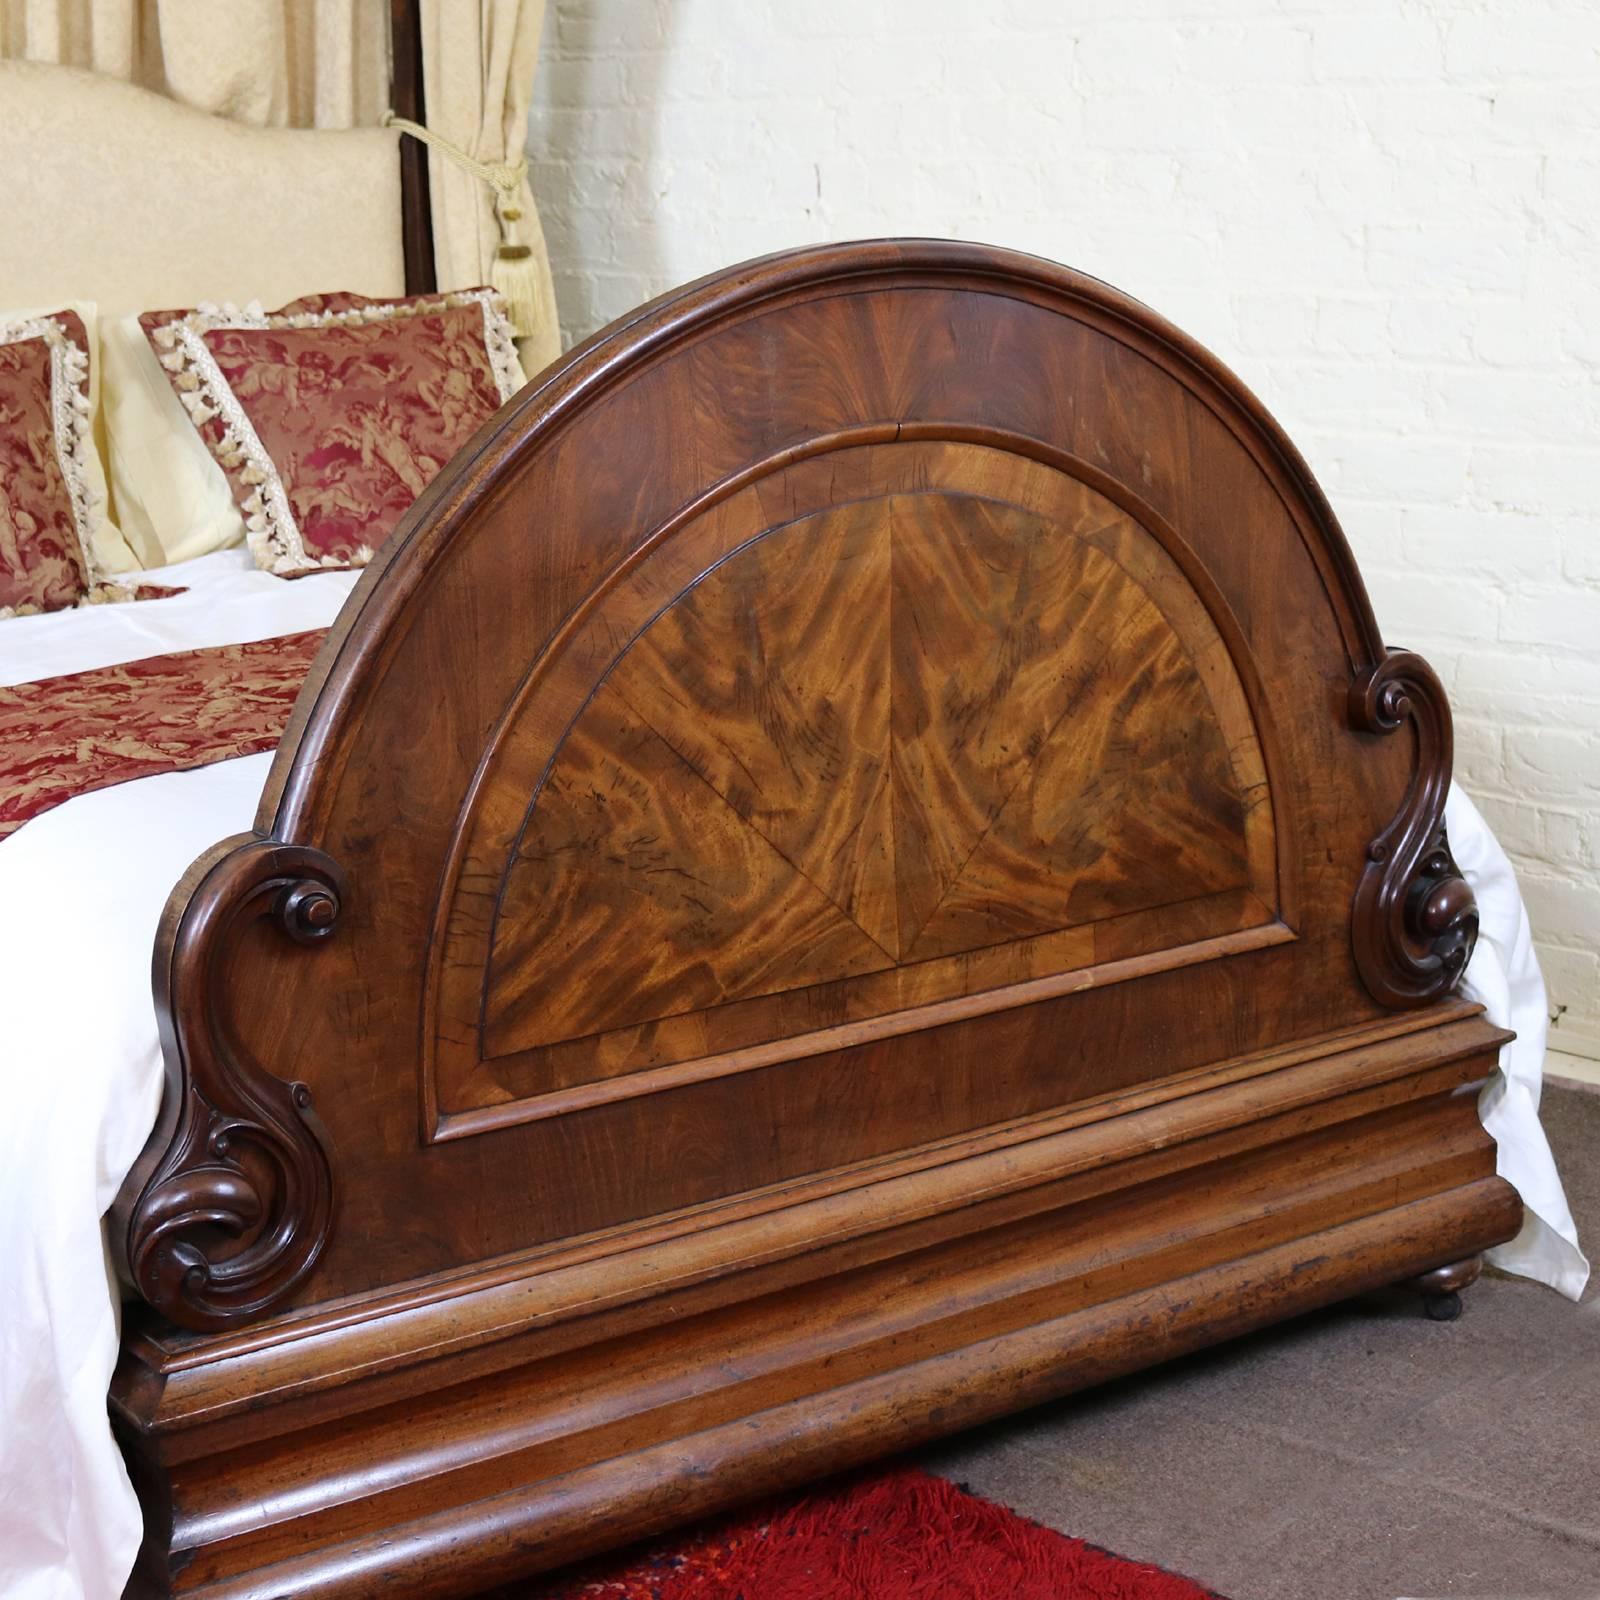 A magnificent Victorian bedstead with flame mahogany arched foot board and shaped canopy. 
The side runners and the back posts have been replaced and the arched back board has been upholstered in the same fabric as the drapes, which are included in